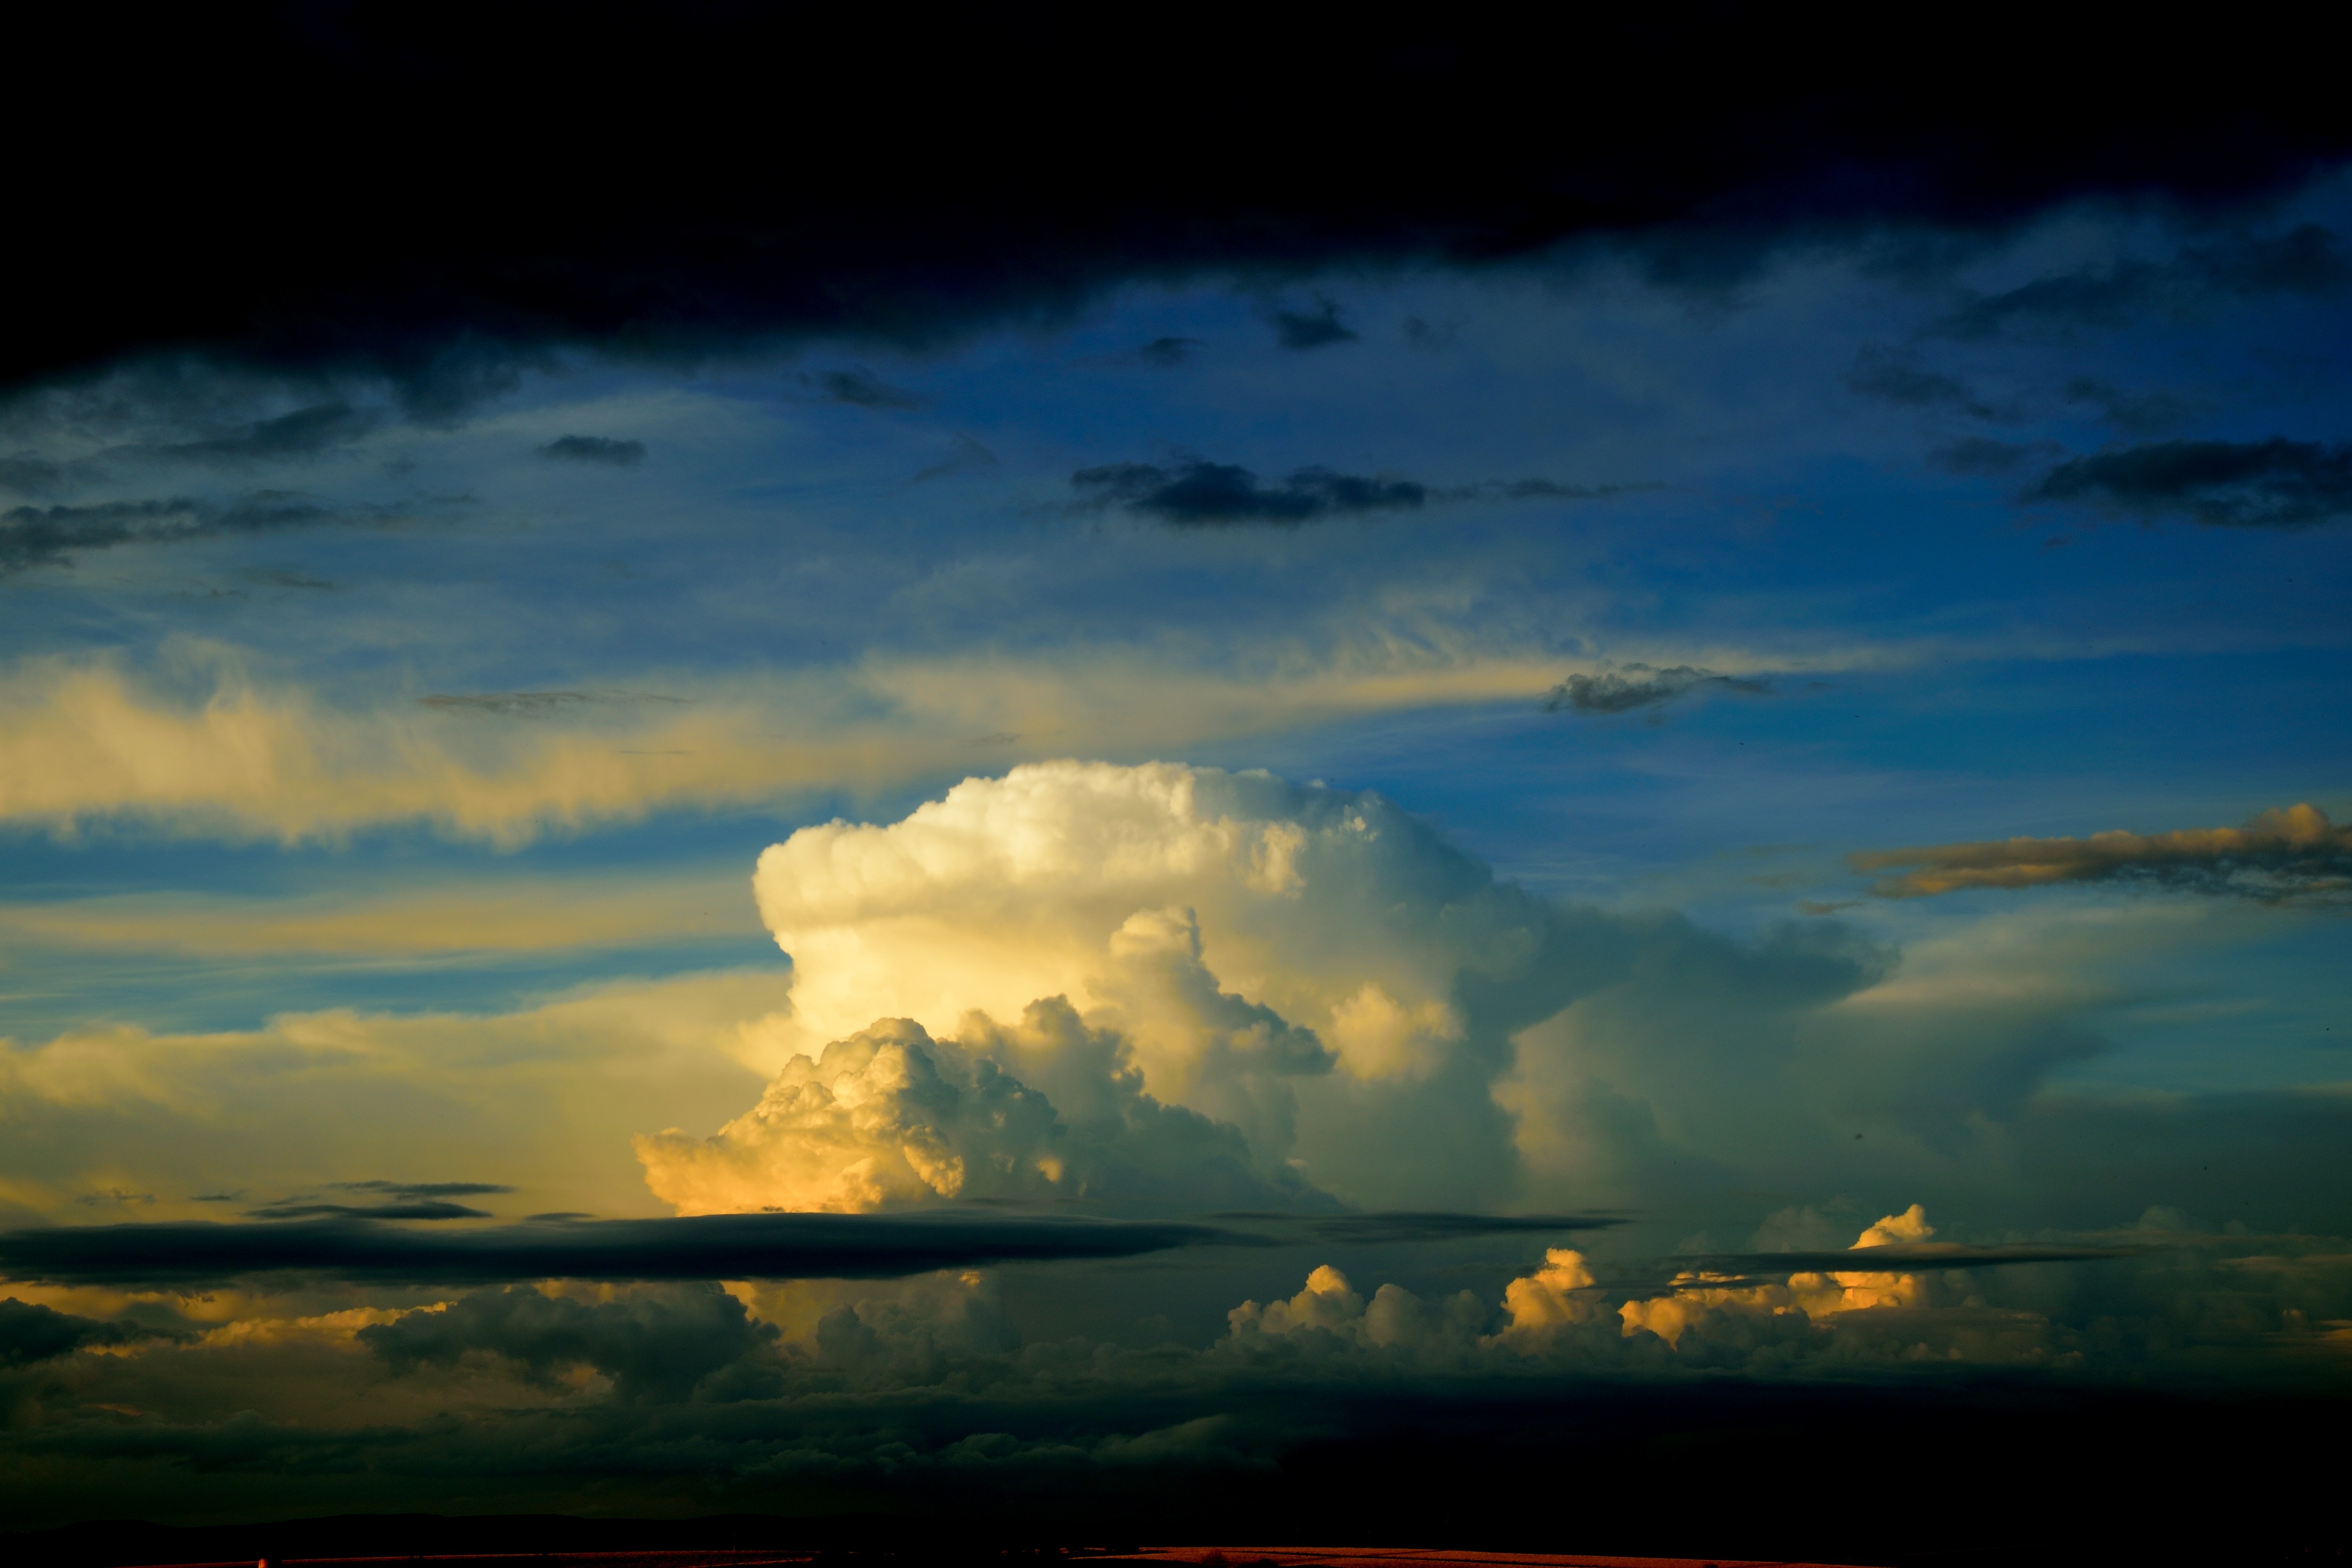 Download wallpaper 4500x3000 sky, clouds, overcast HD background